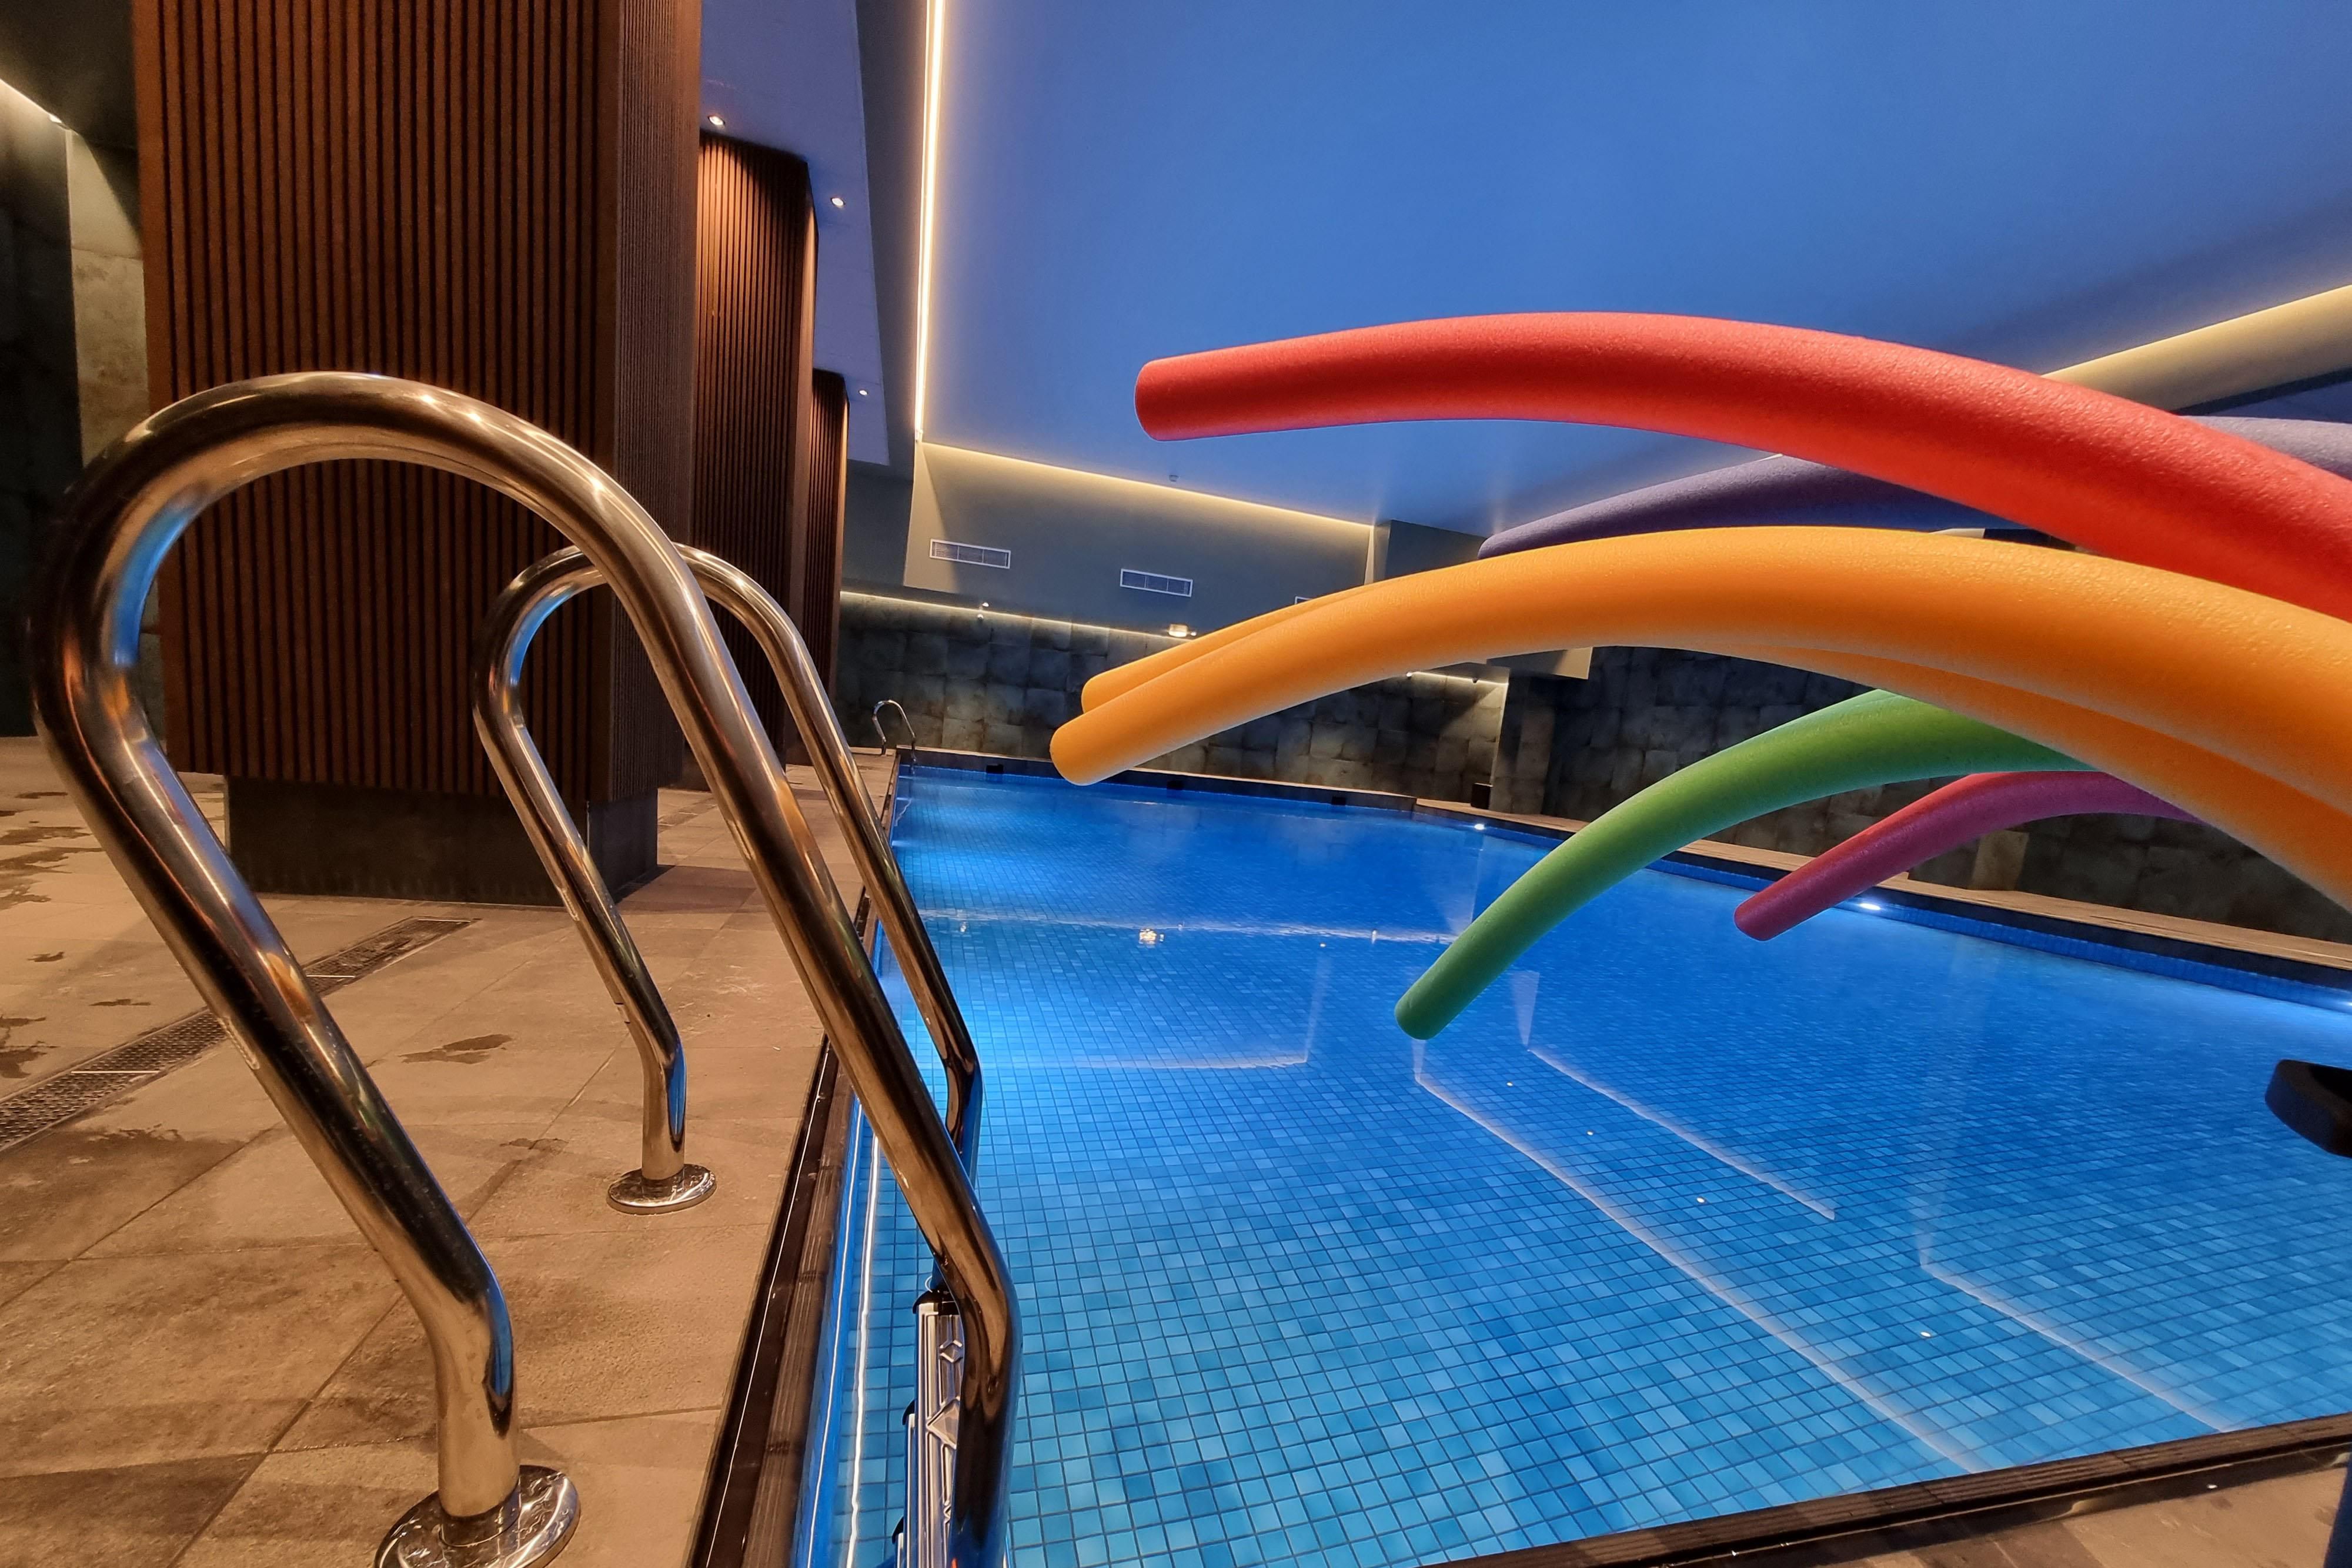 Have a relaxing swim or try water walking - our pool is ready for 